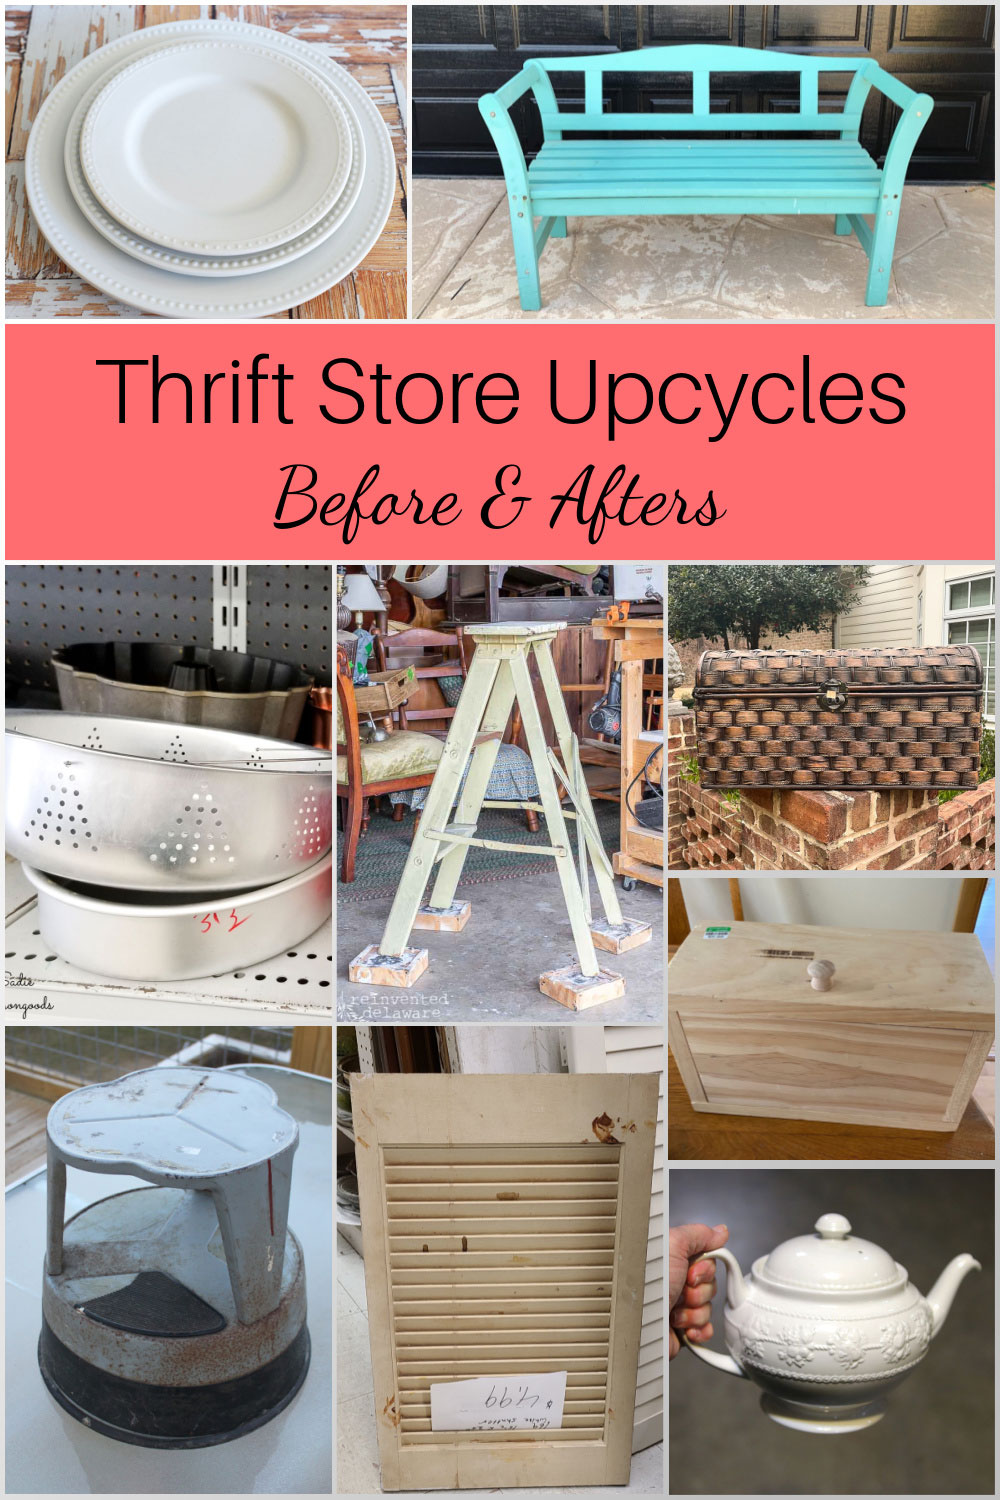 Different items found at thrift stores and how you can repurpose them into fun home decor.